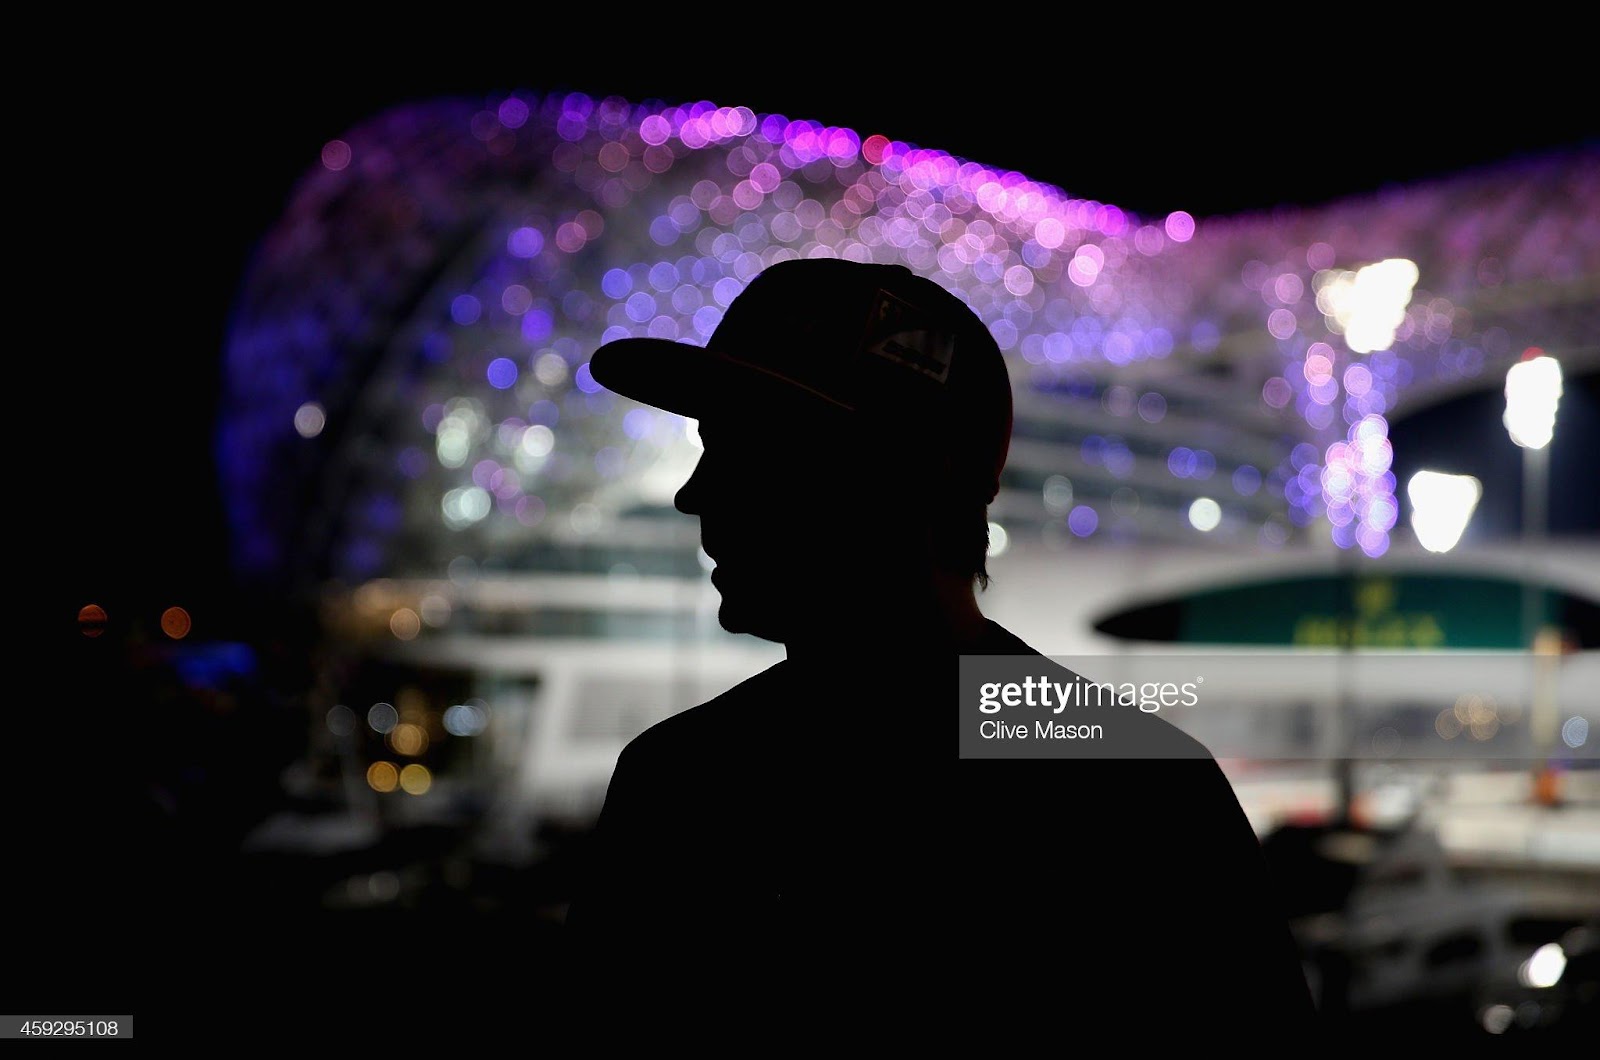 Kimi Raikkonen speaks with guests during a Shell guest appearance in Ferrari hospitality during previews ahead of the Abu Dhabi F1 Grand Prix at Yas Marina Circuit on November 20, 2014 in Abu Dhabi, United Arab Emirates. 